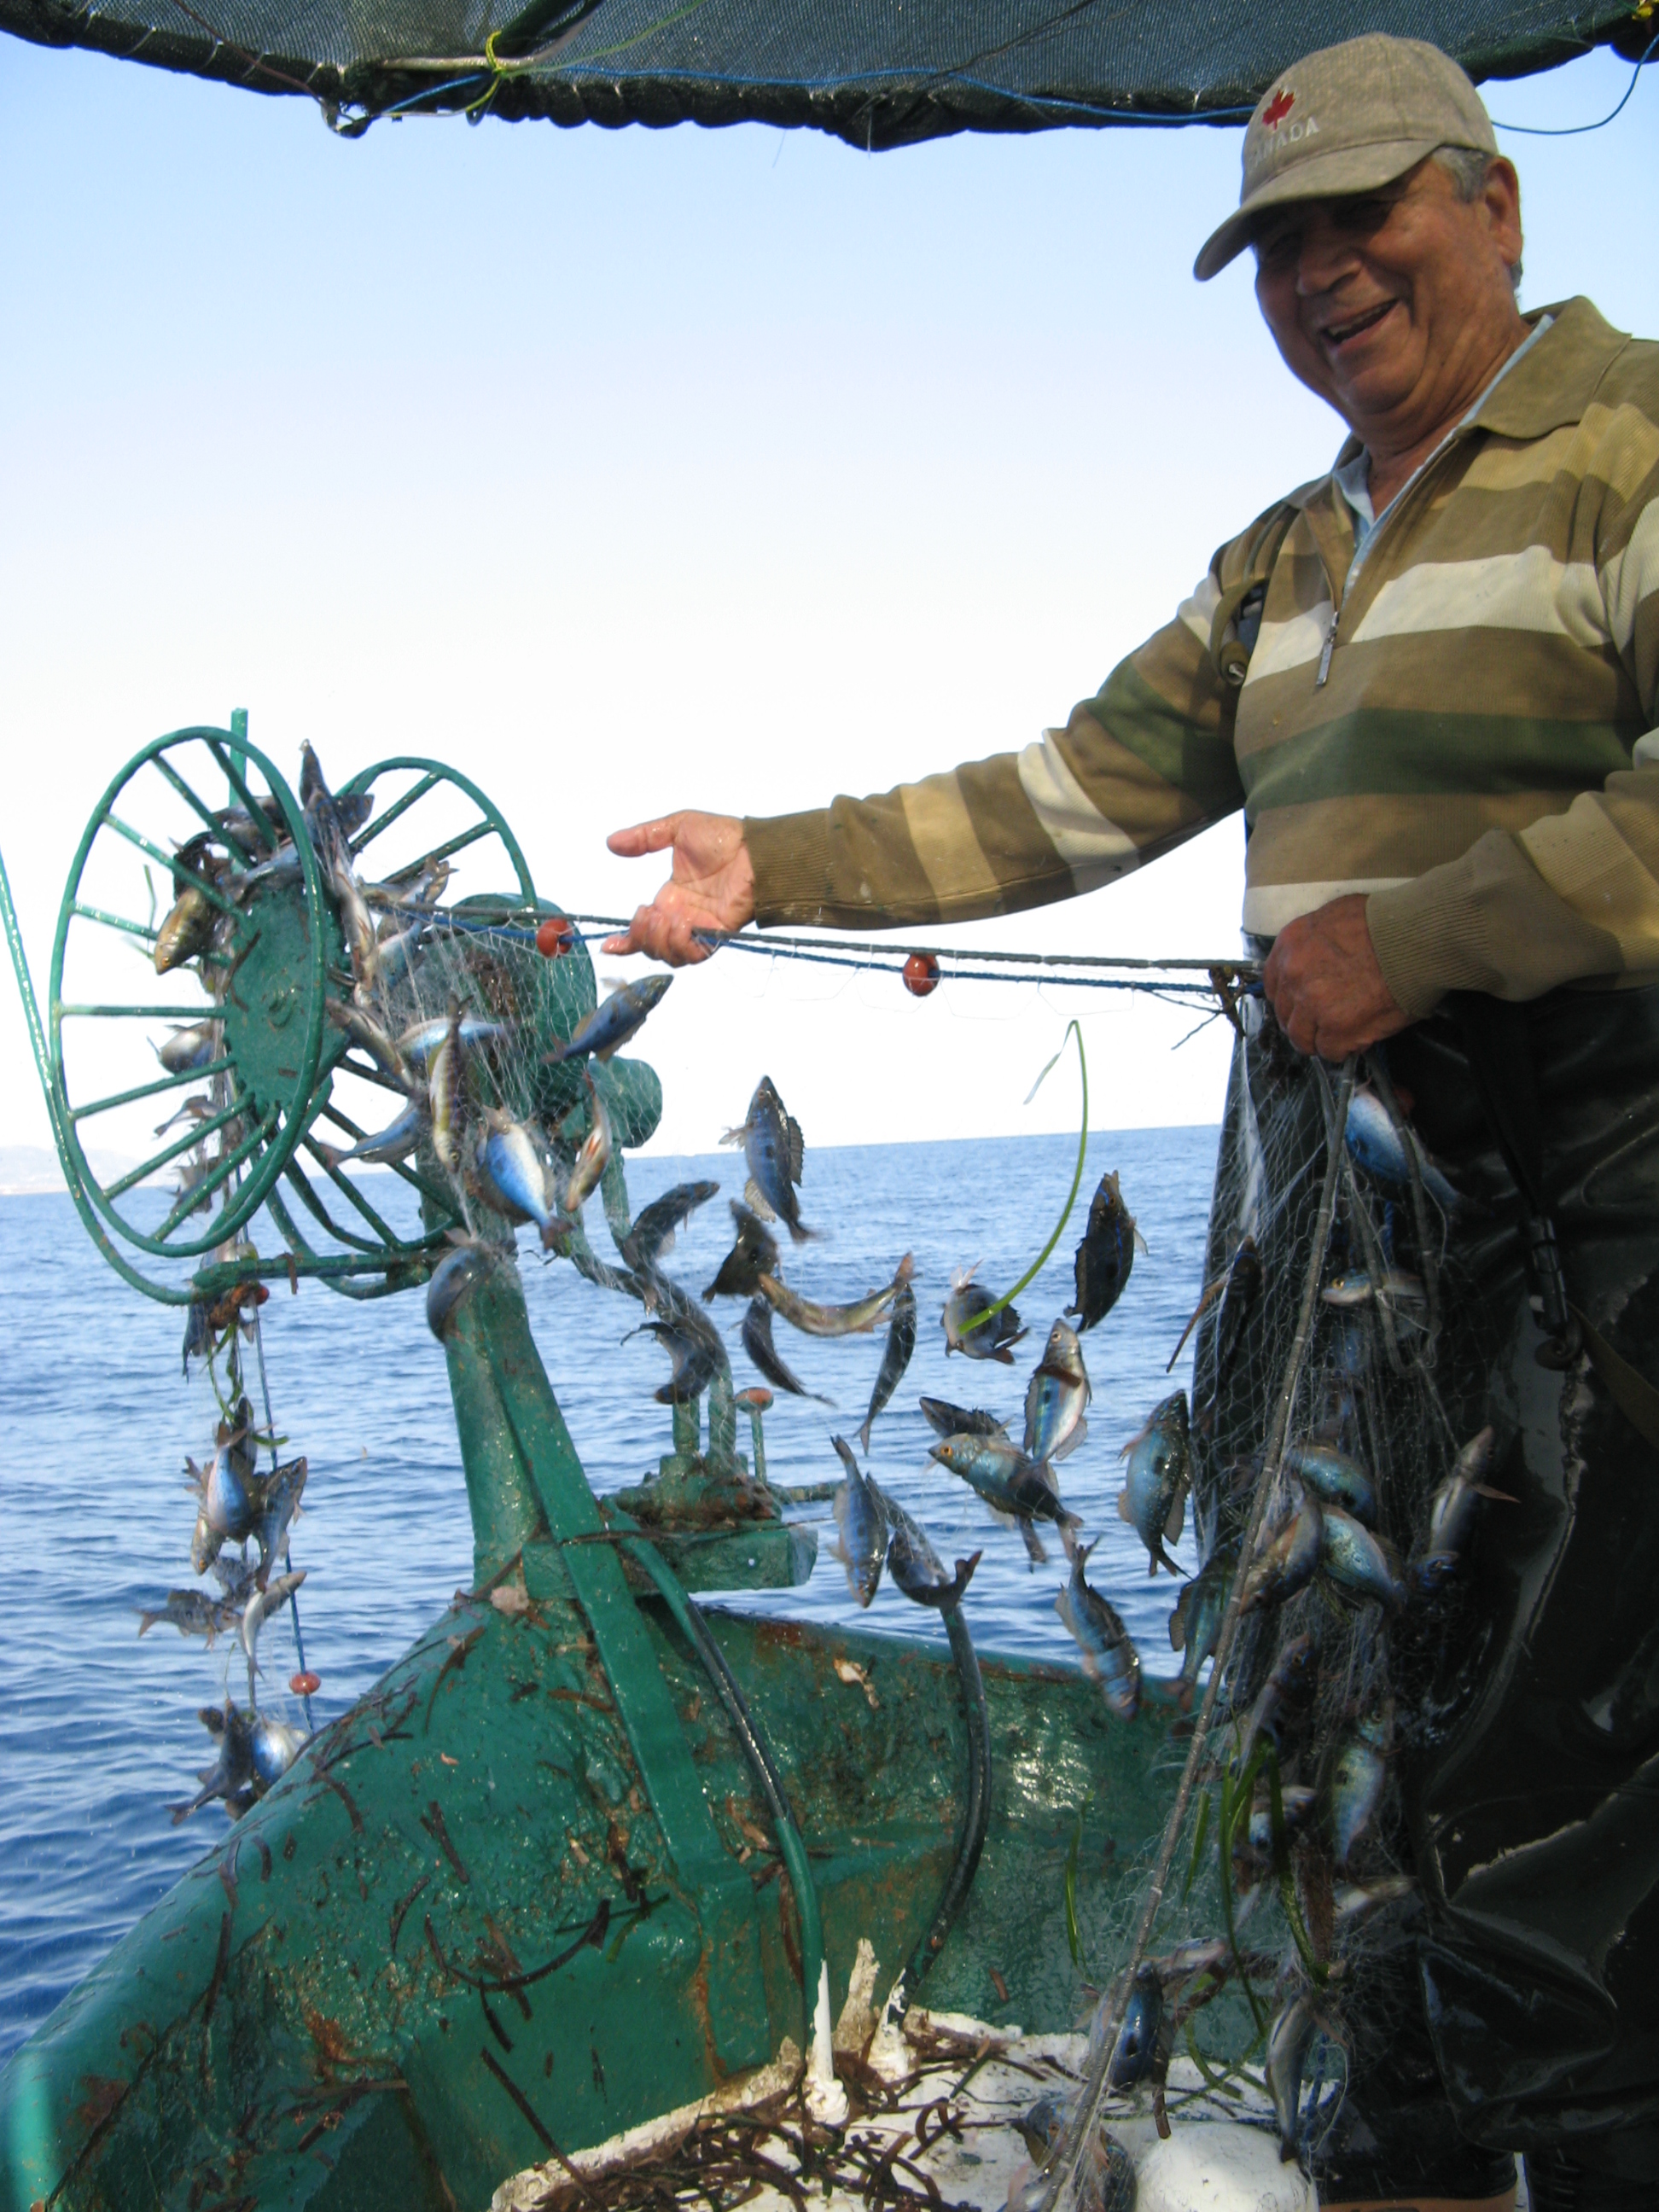 A fisherman off the coast of northern Cyprus with his catch (Robin Snape/University of Exeter/PA).